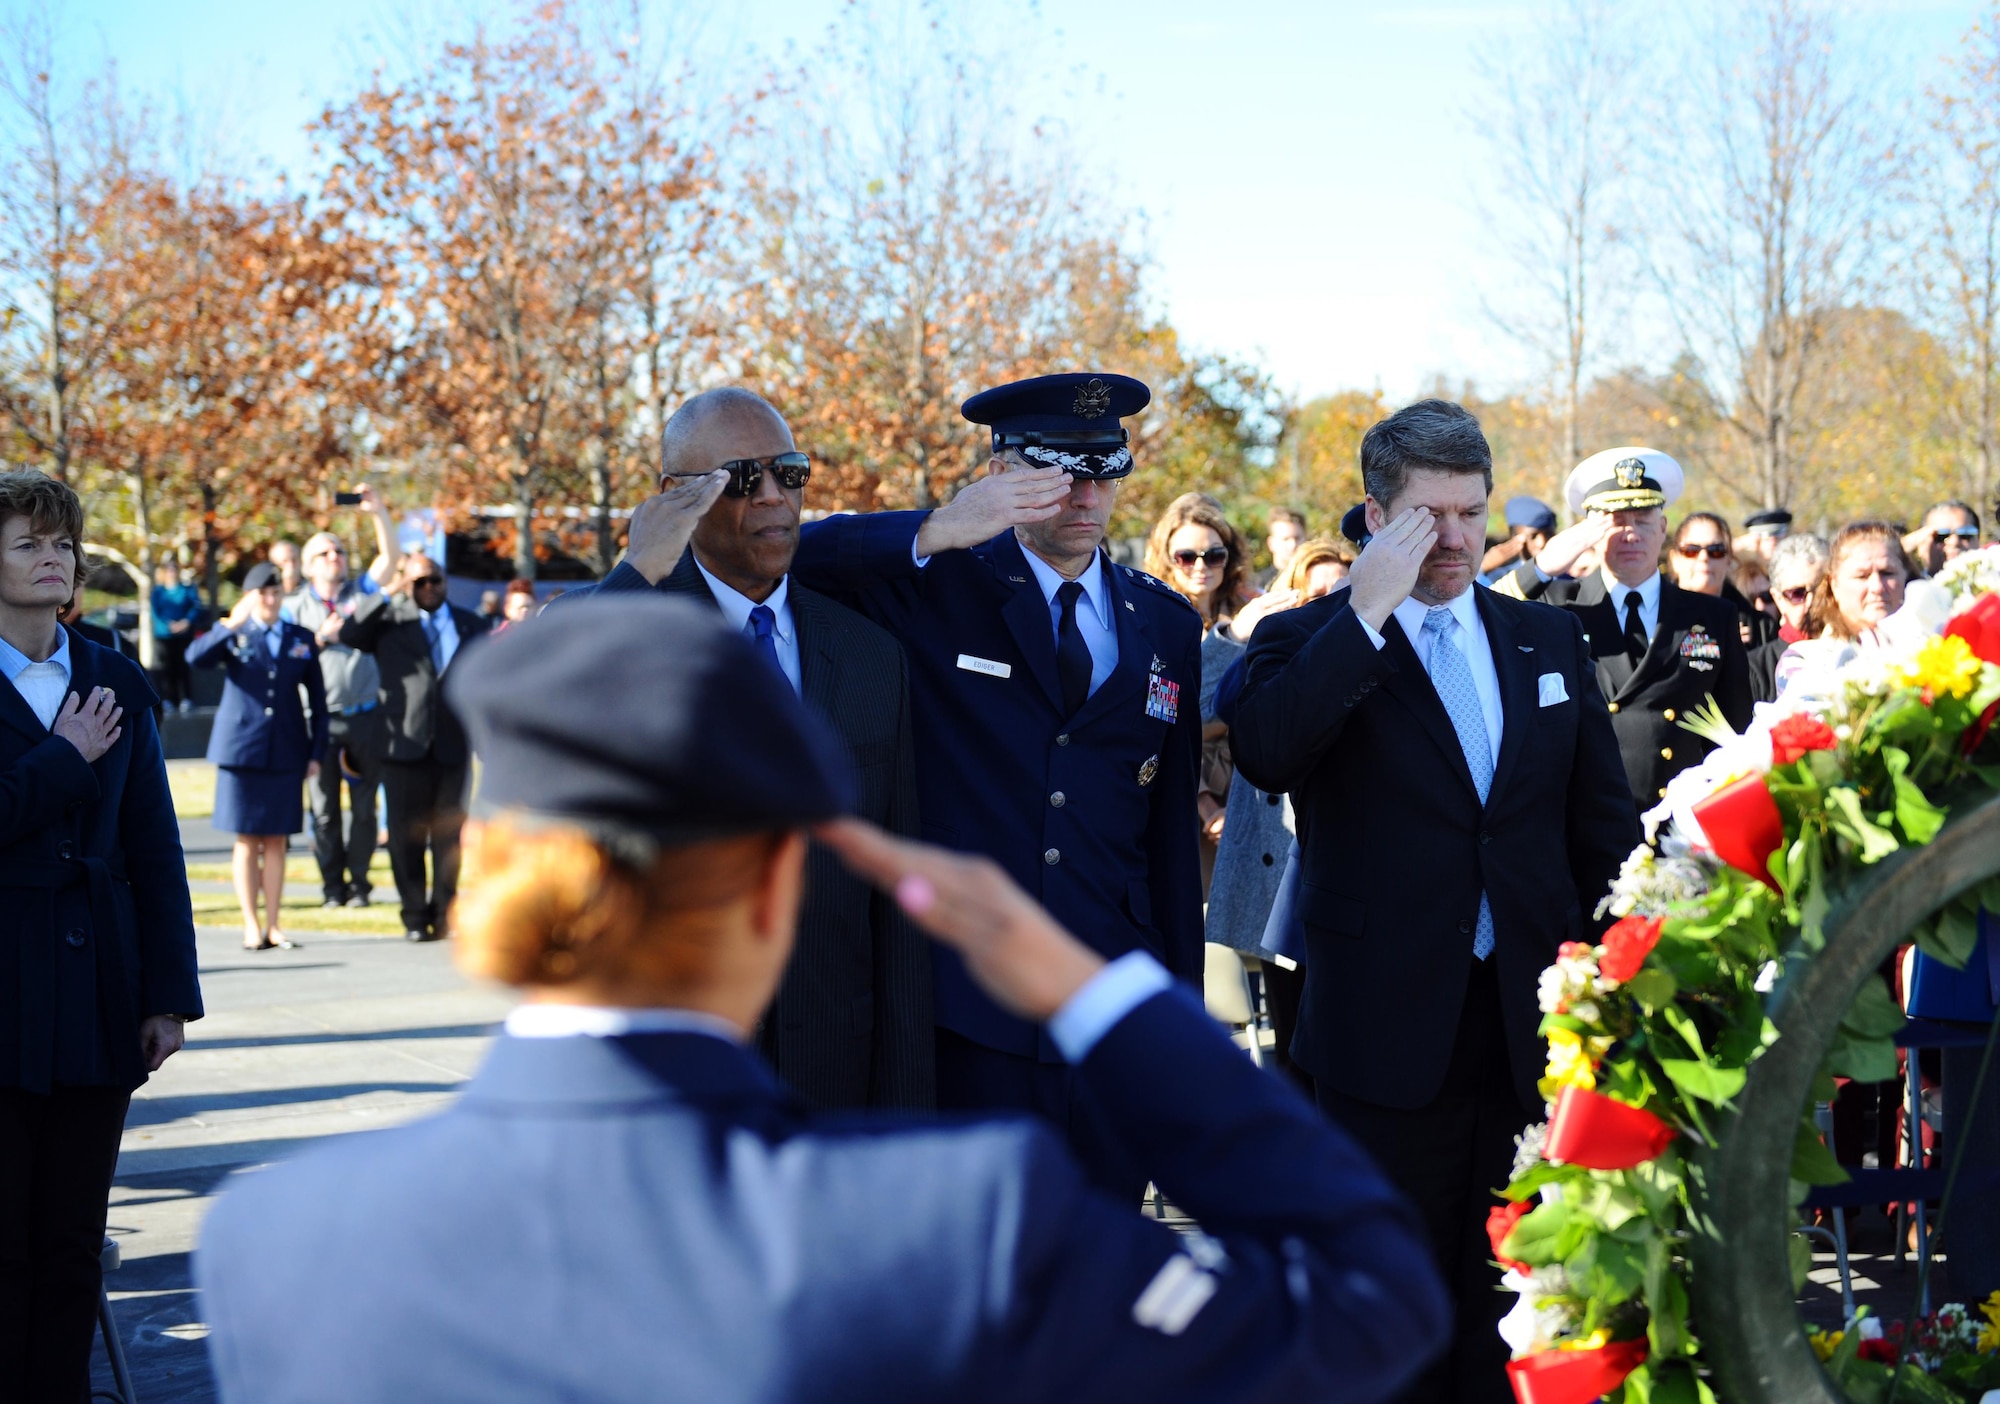 From left to right, retired Gen. Larry O. Spencer, the Air Force Association president; Lt. Gen. Mark A. Ediger, the Air Force surgeon general; and retired Chief Master Sgt. Mark A. Stevenson, the Air Force Sergeants Association chief operating officer, present a salute during a wreath laying ceremony as part of the Veterans Day event at the Air Force Memorial Nov. 11, 2015. (U.S. Air Force photo/Tech. Sgt. Bryan Franks)